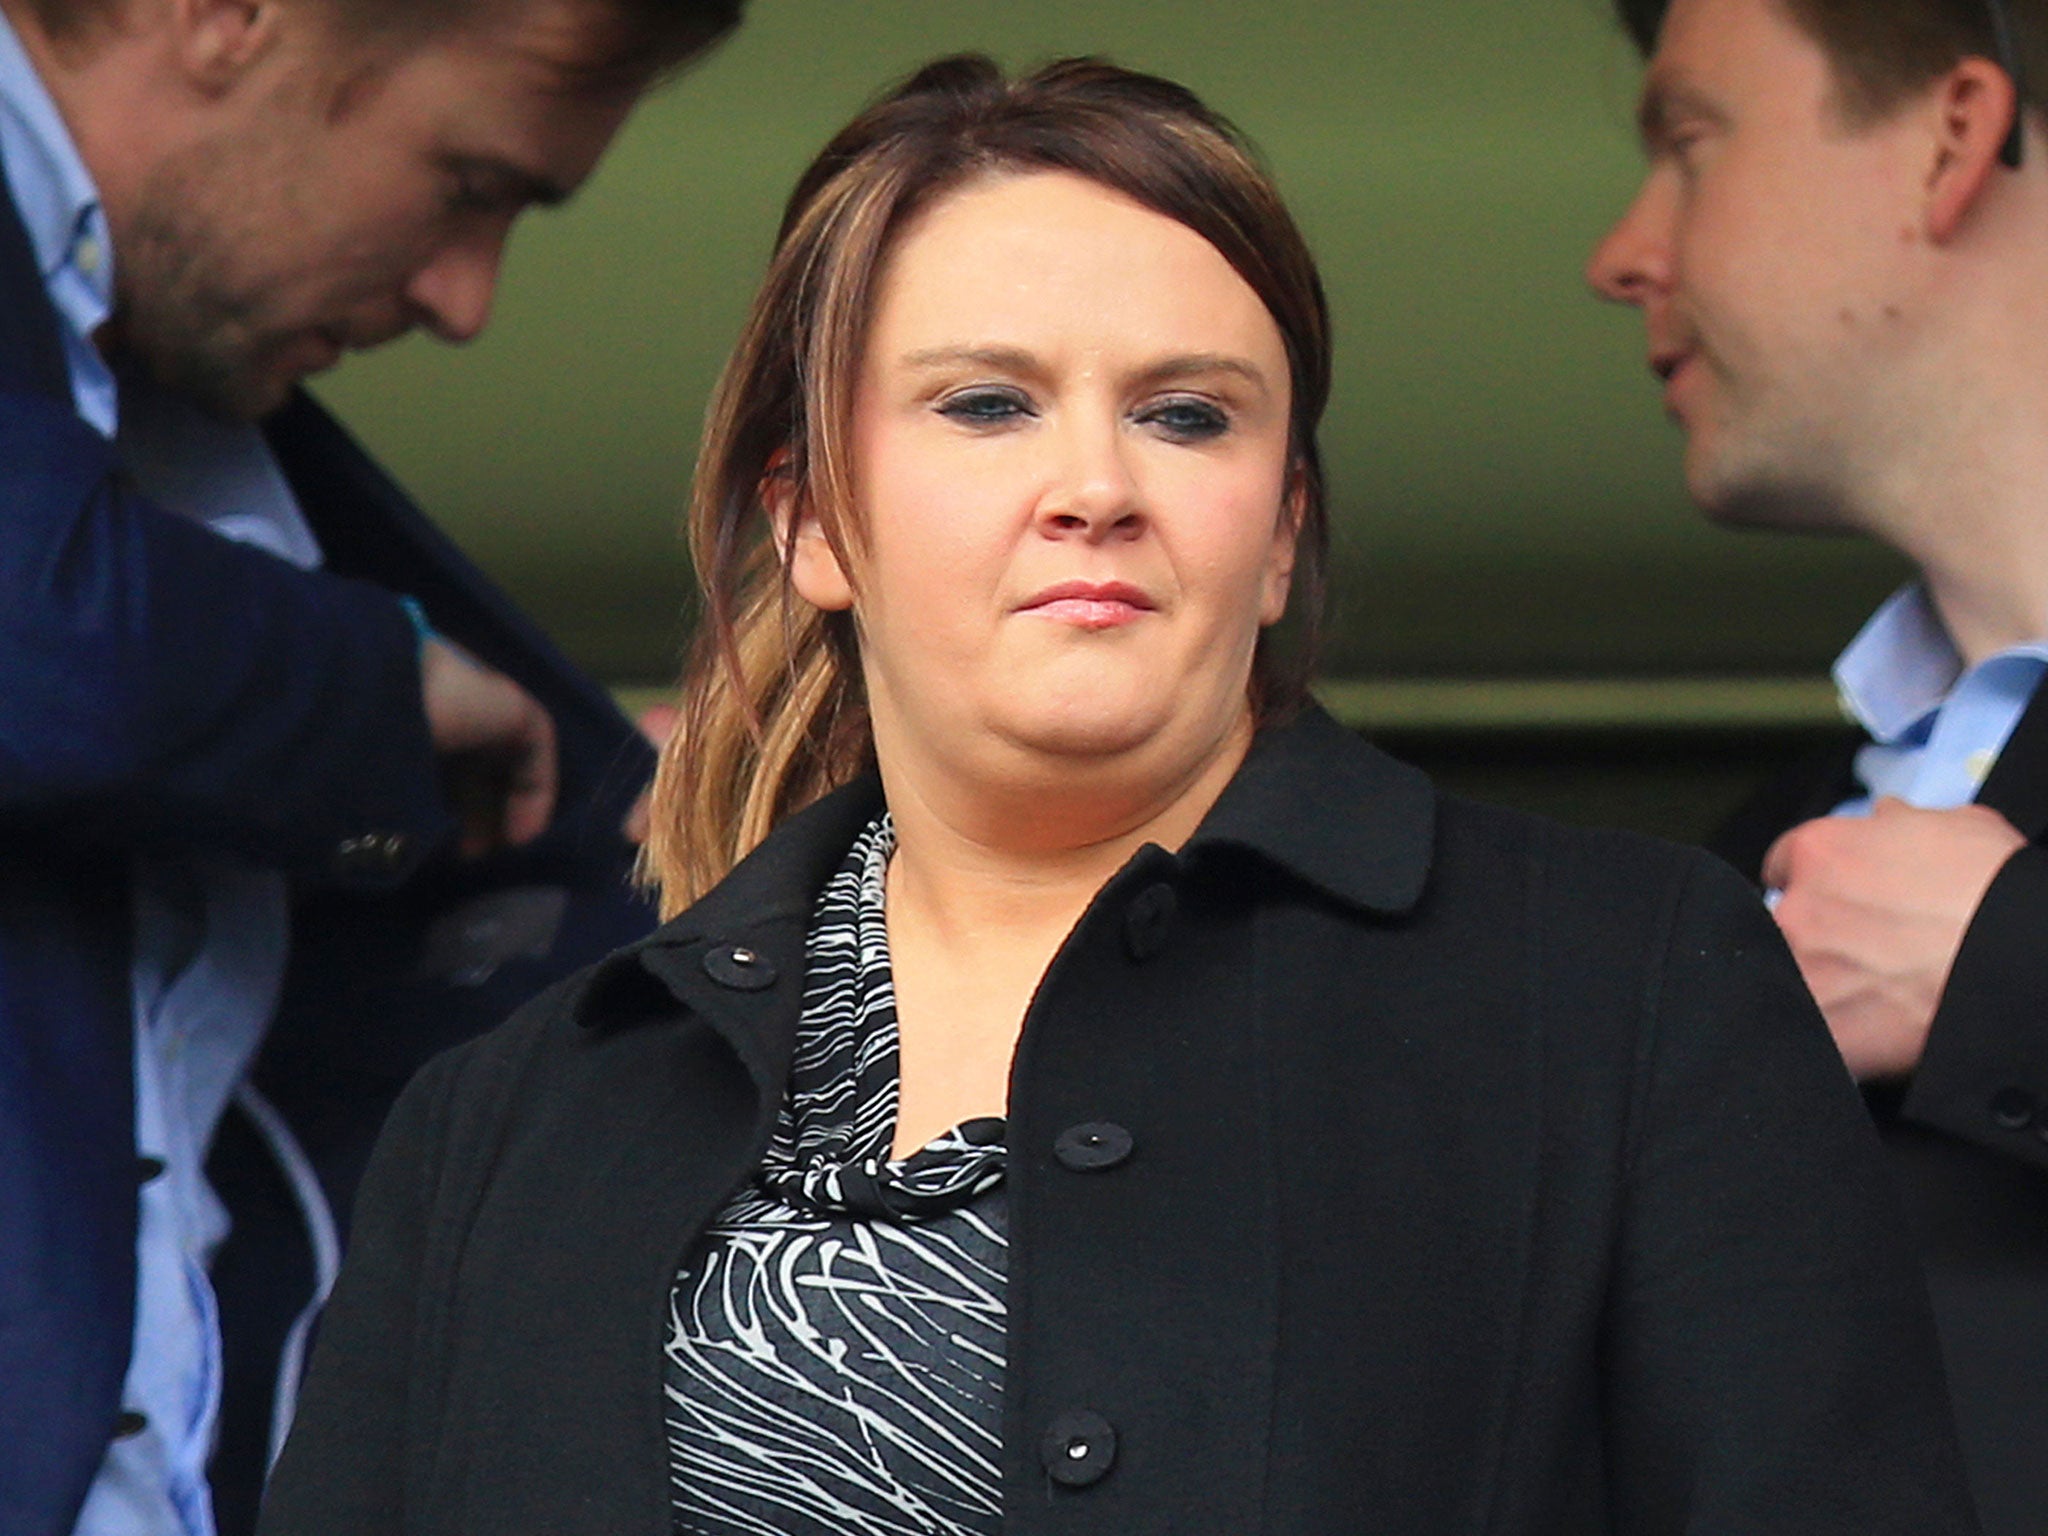 Margaret Byrne, Sunderland’s chief executive, is reportedly staying at a villa in Portugal